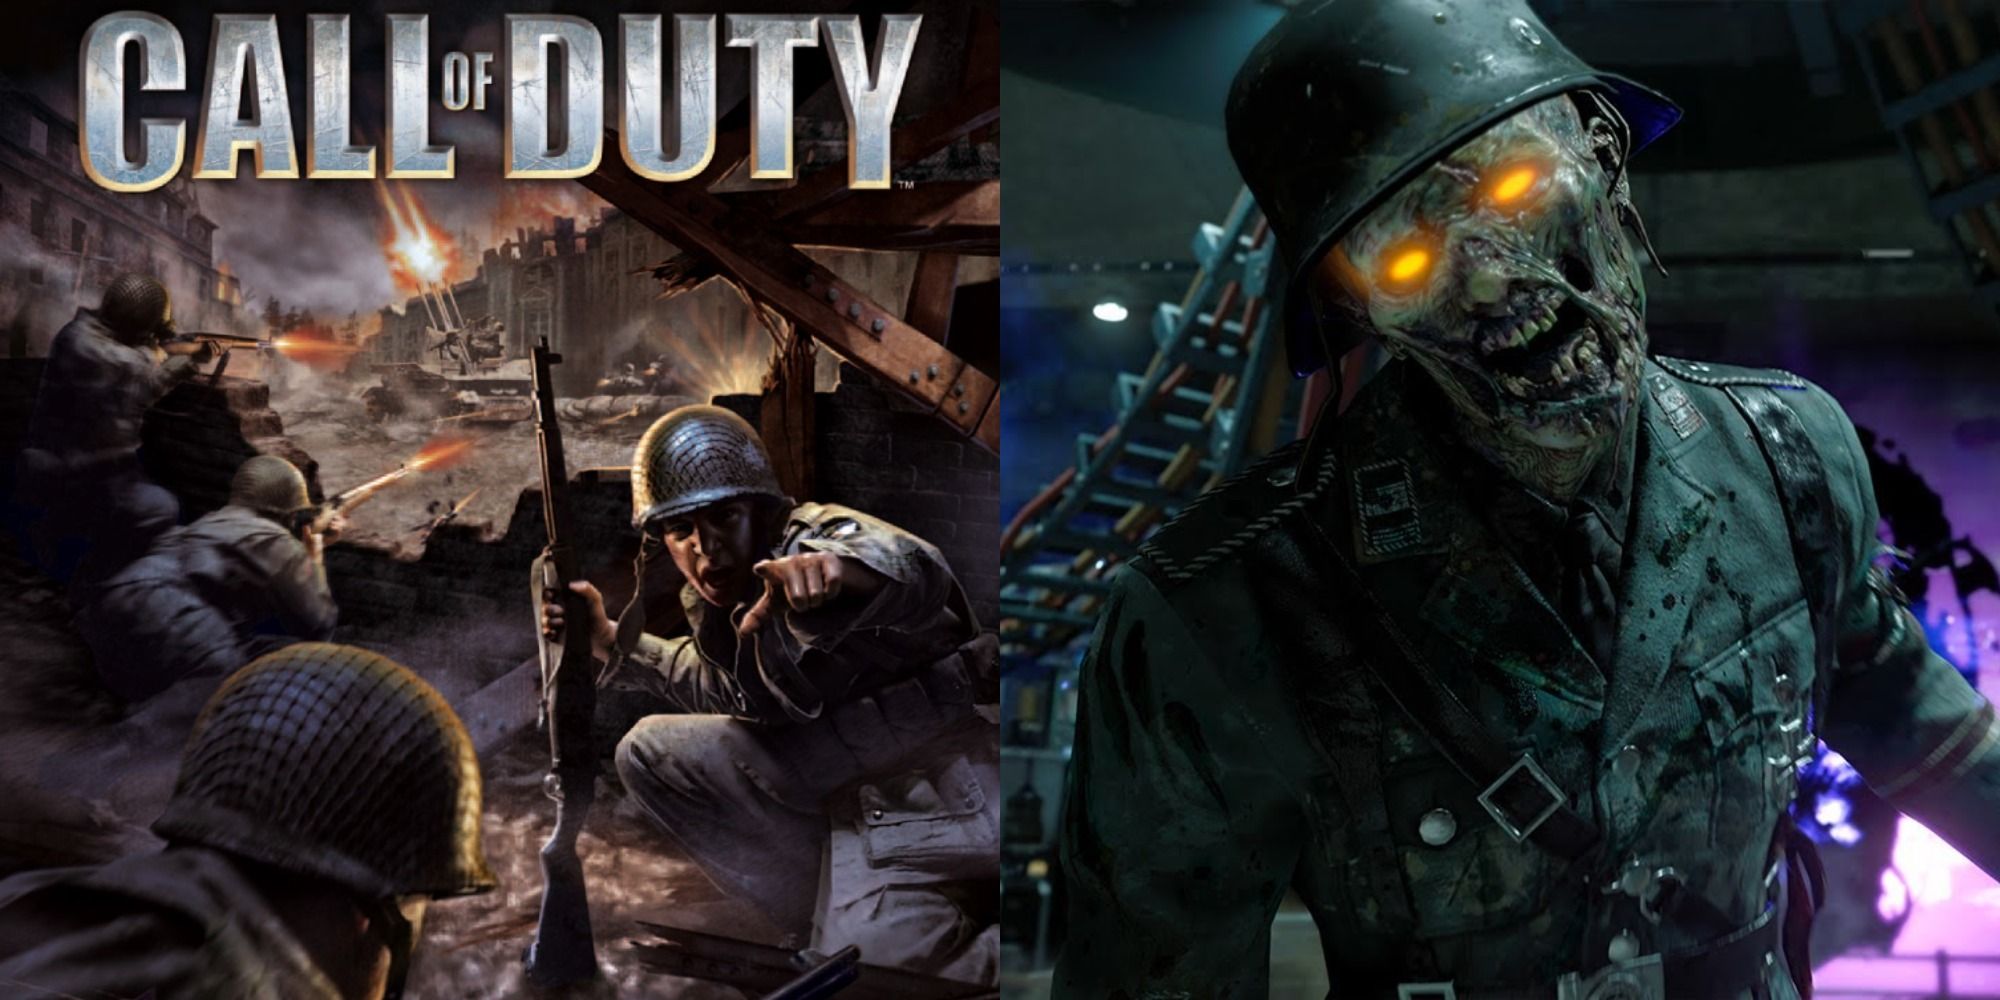 Split image showing the cover for the first Call of Duty, and a zombie